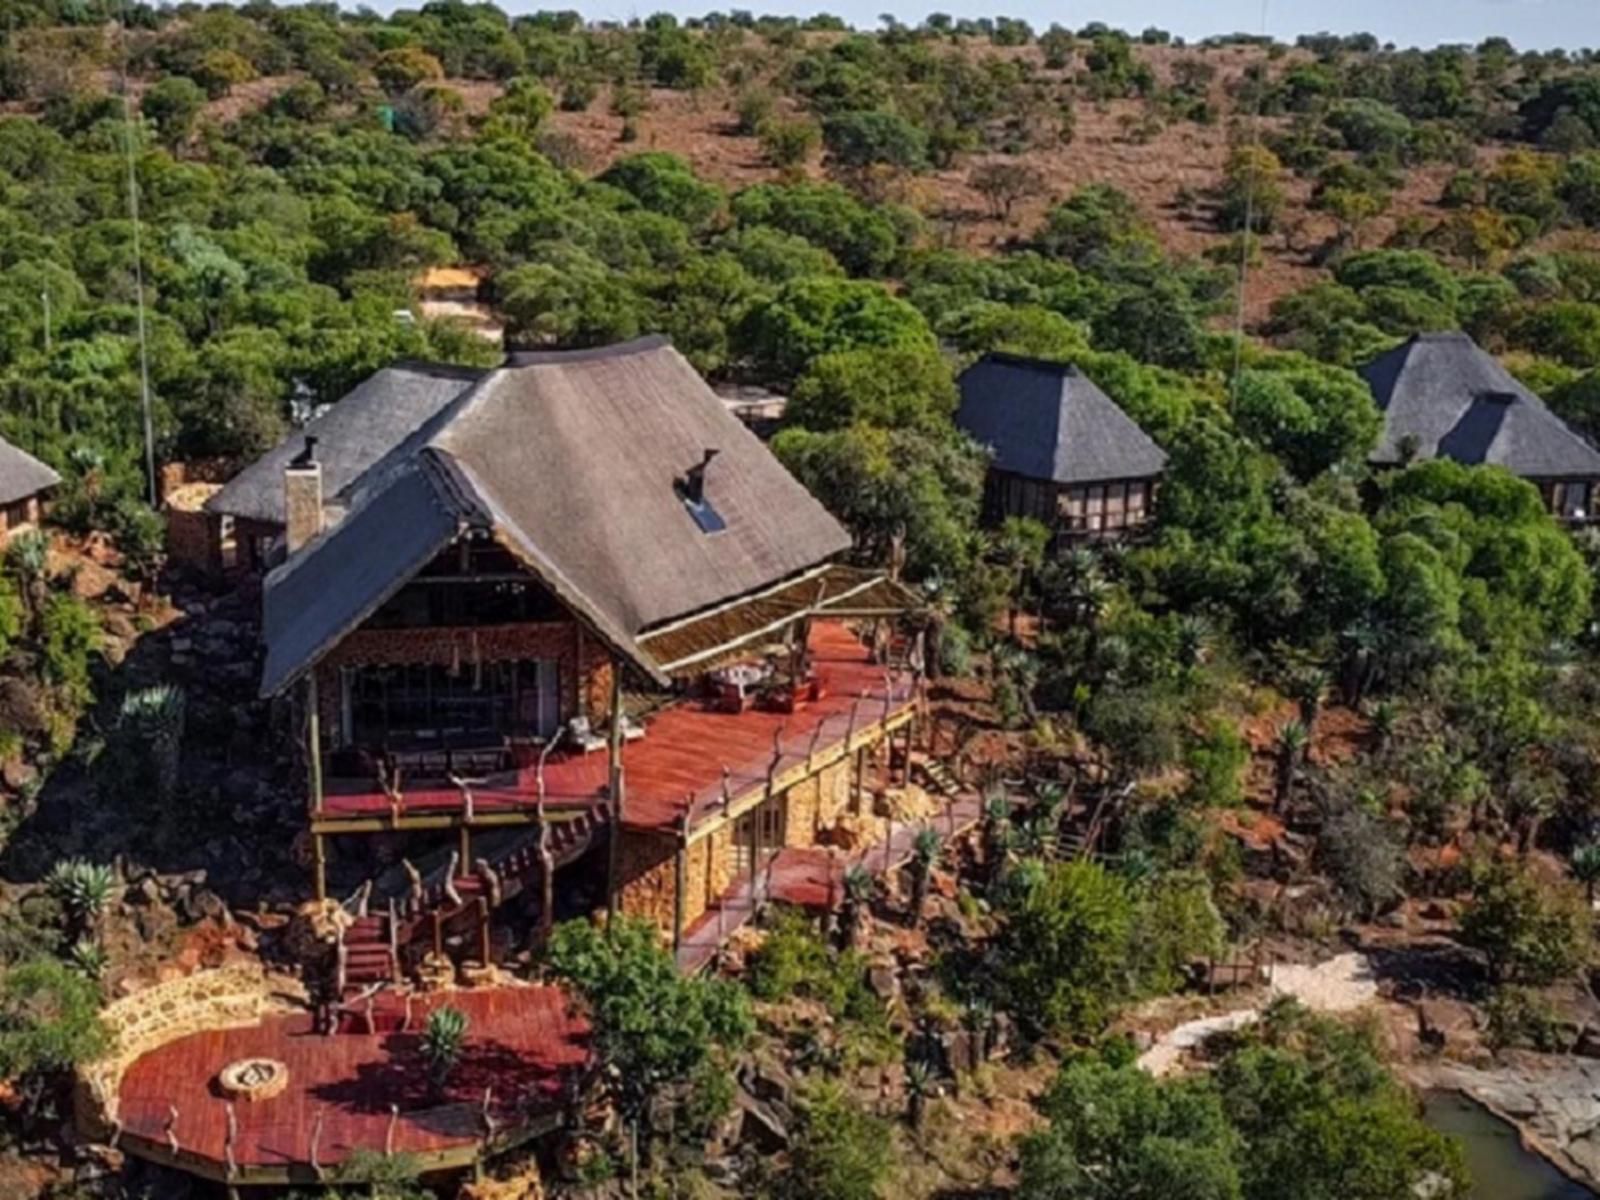 Iwamanzi Game Lodge Koster North West Province South Africa Building, Architecture